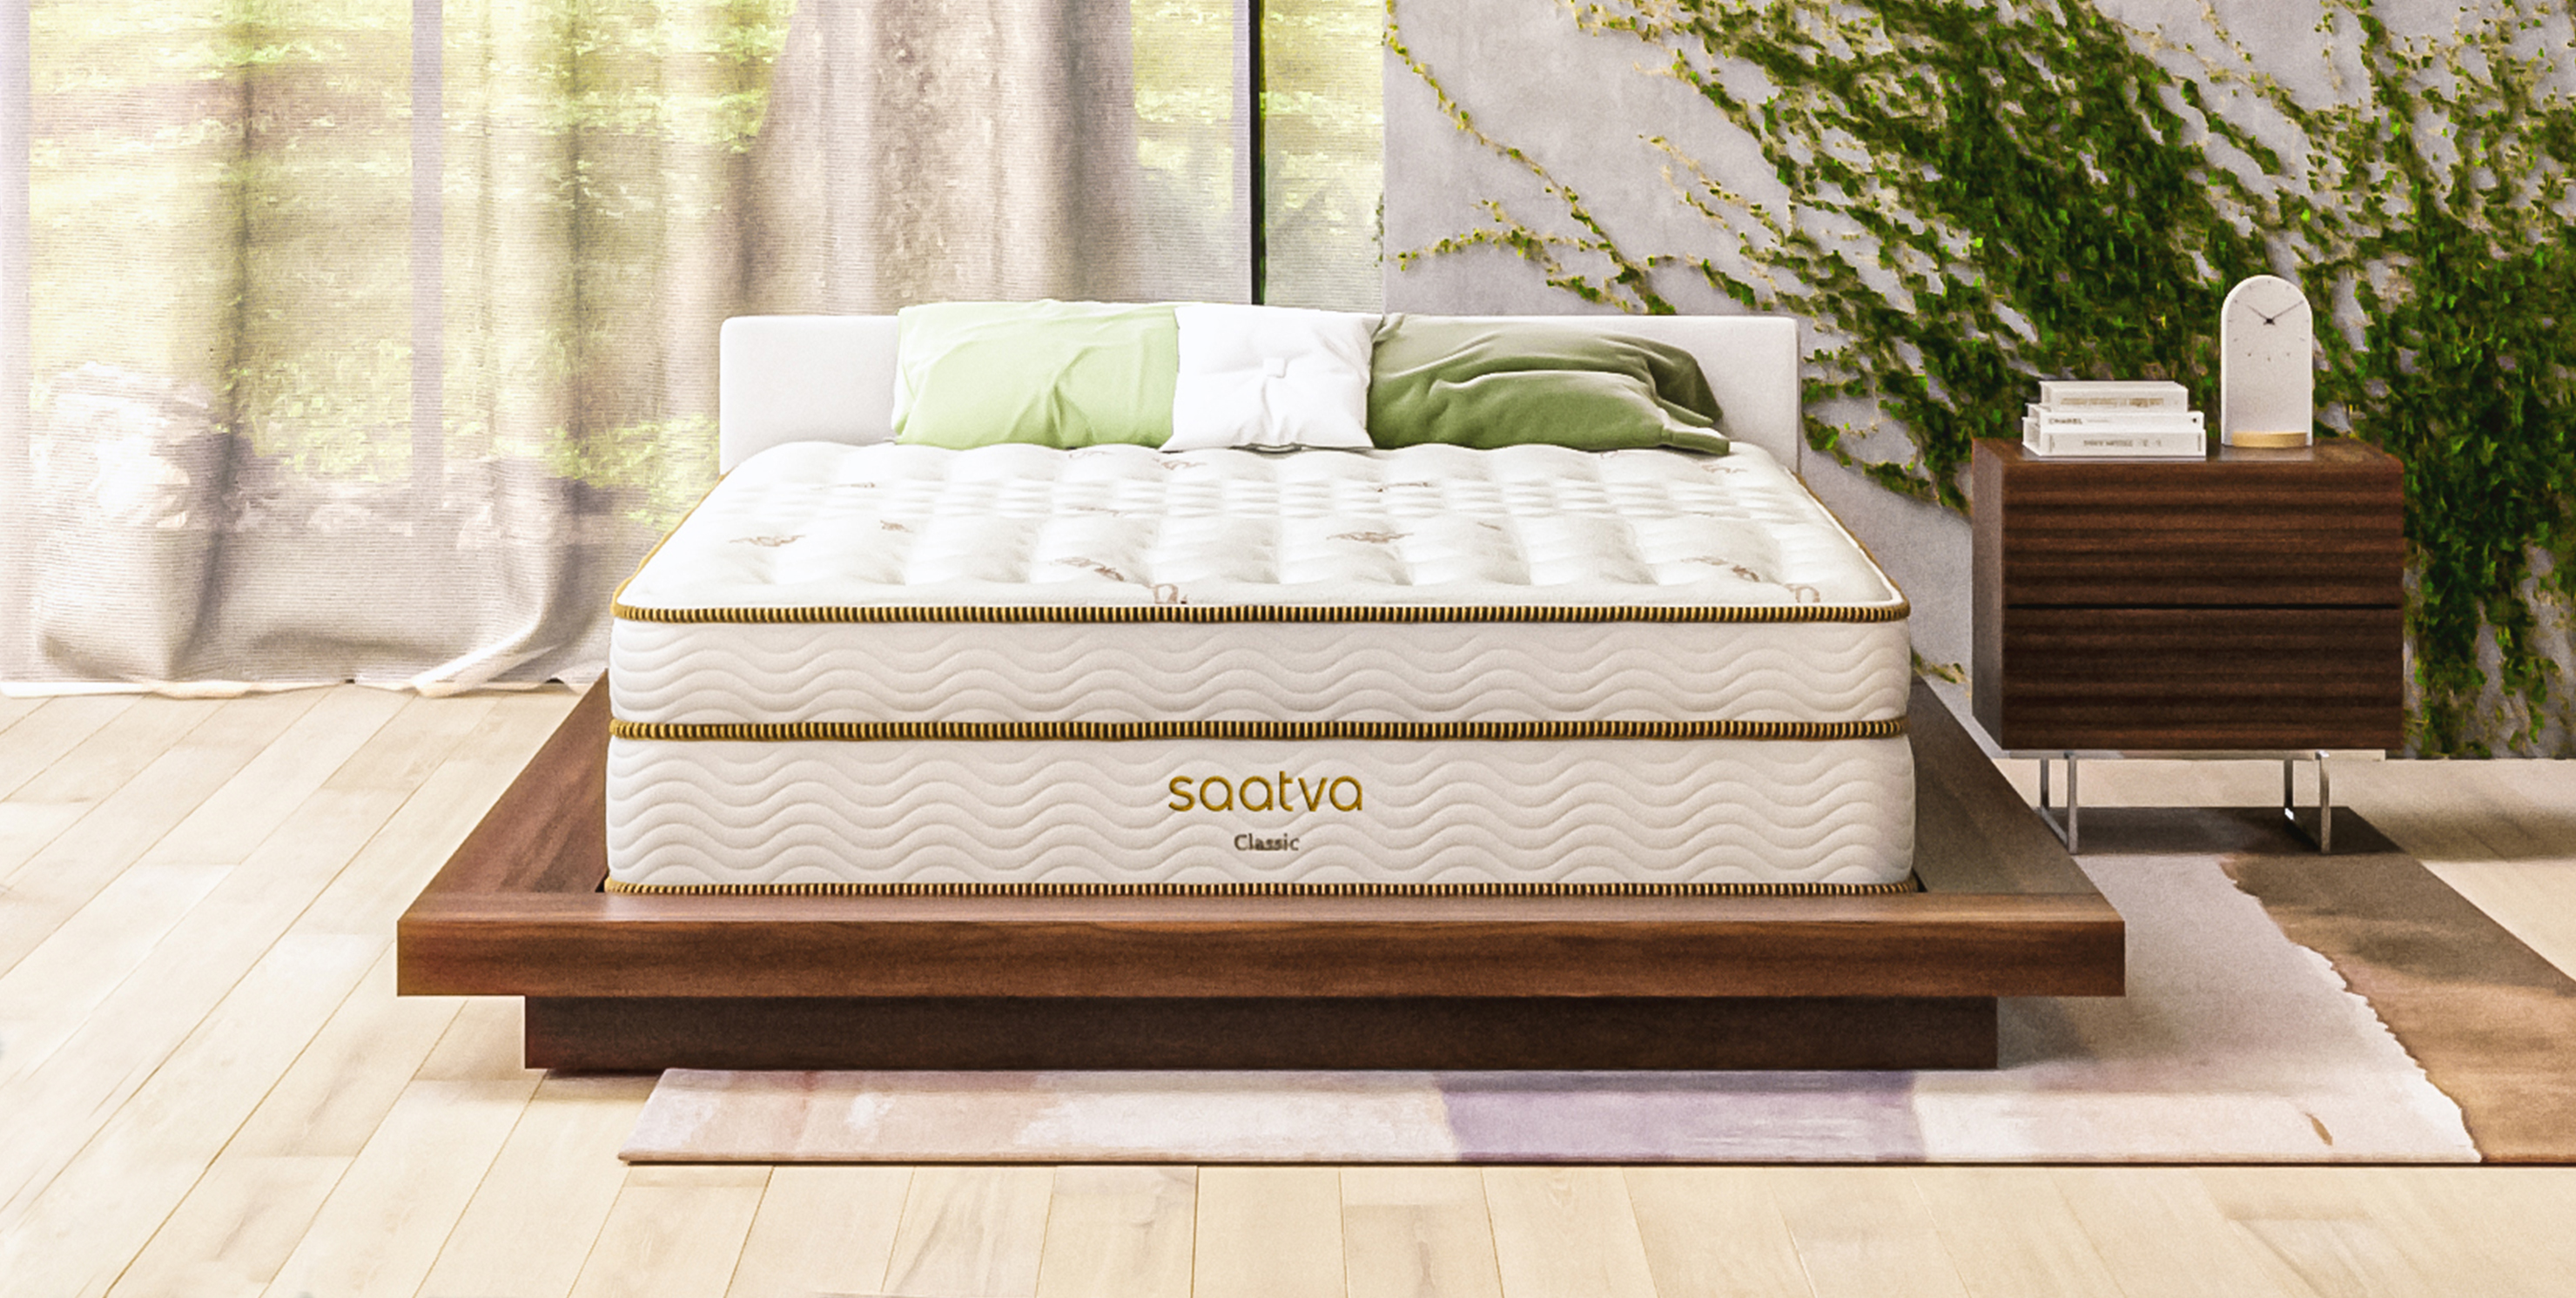 Saatva Classic hybrid mattress placed on a wooden bed base